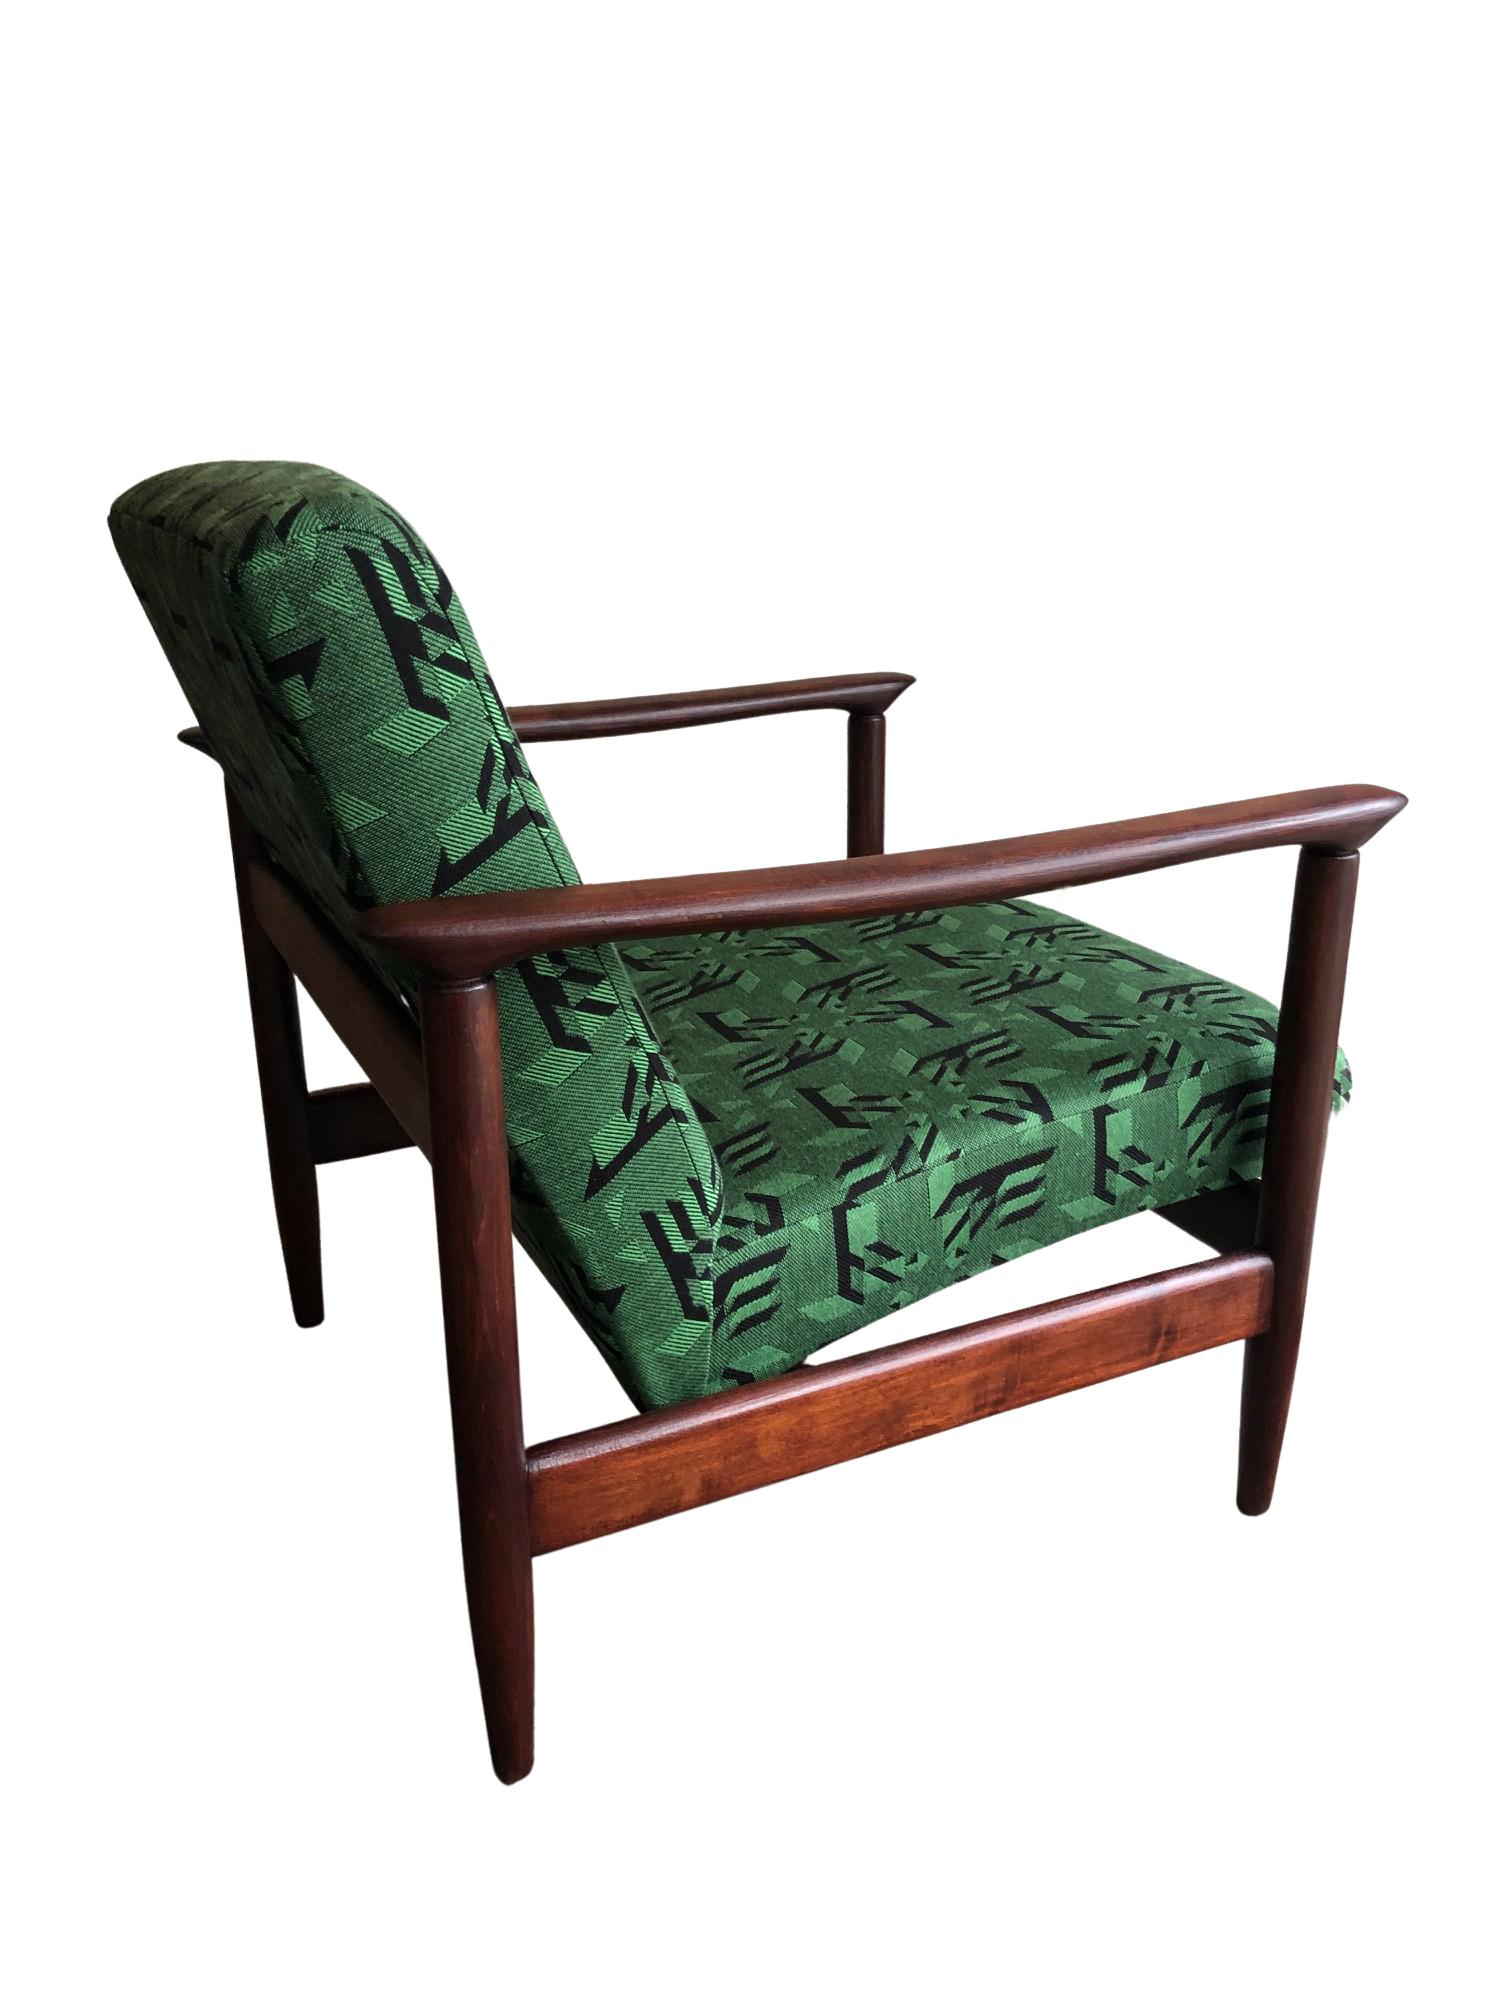 Hand-Crafted Mid Century Armchair in Green Jacquard, by Edmund Homa, 1960s For Sale